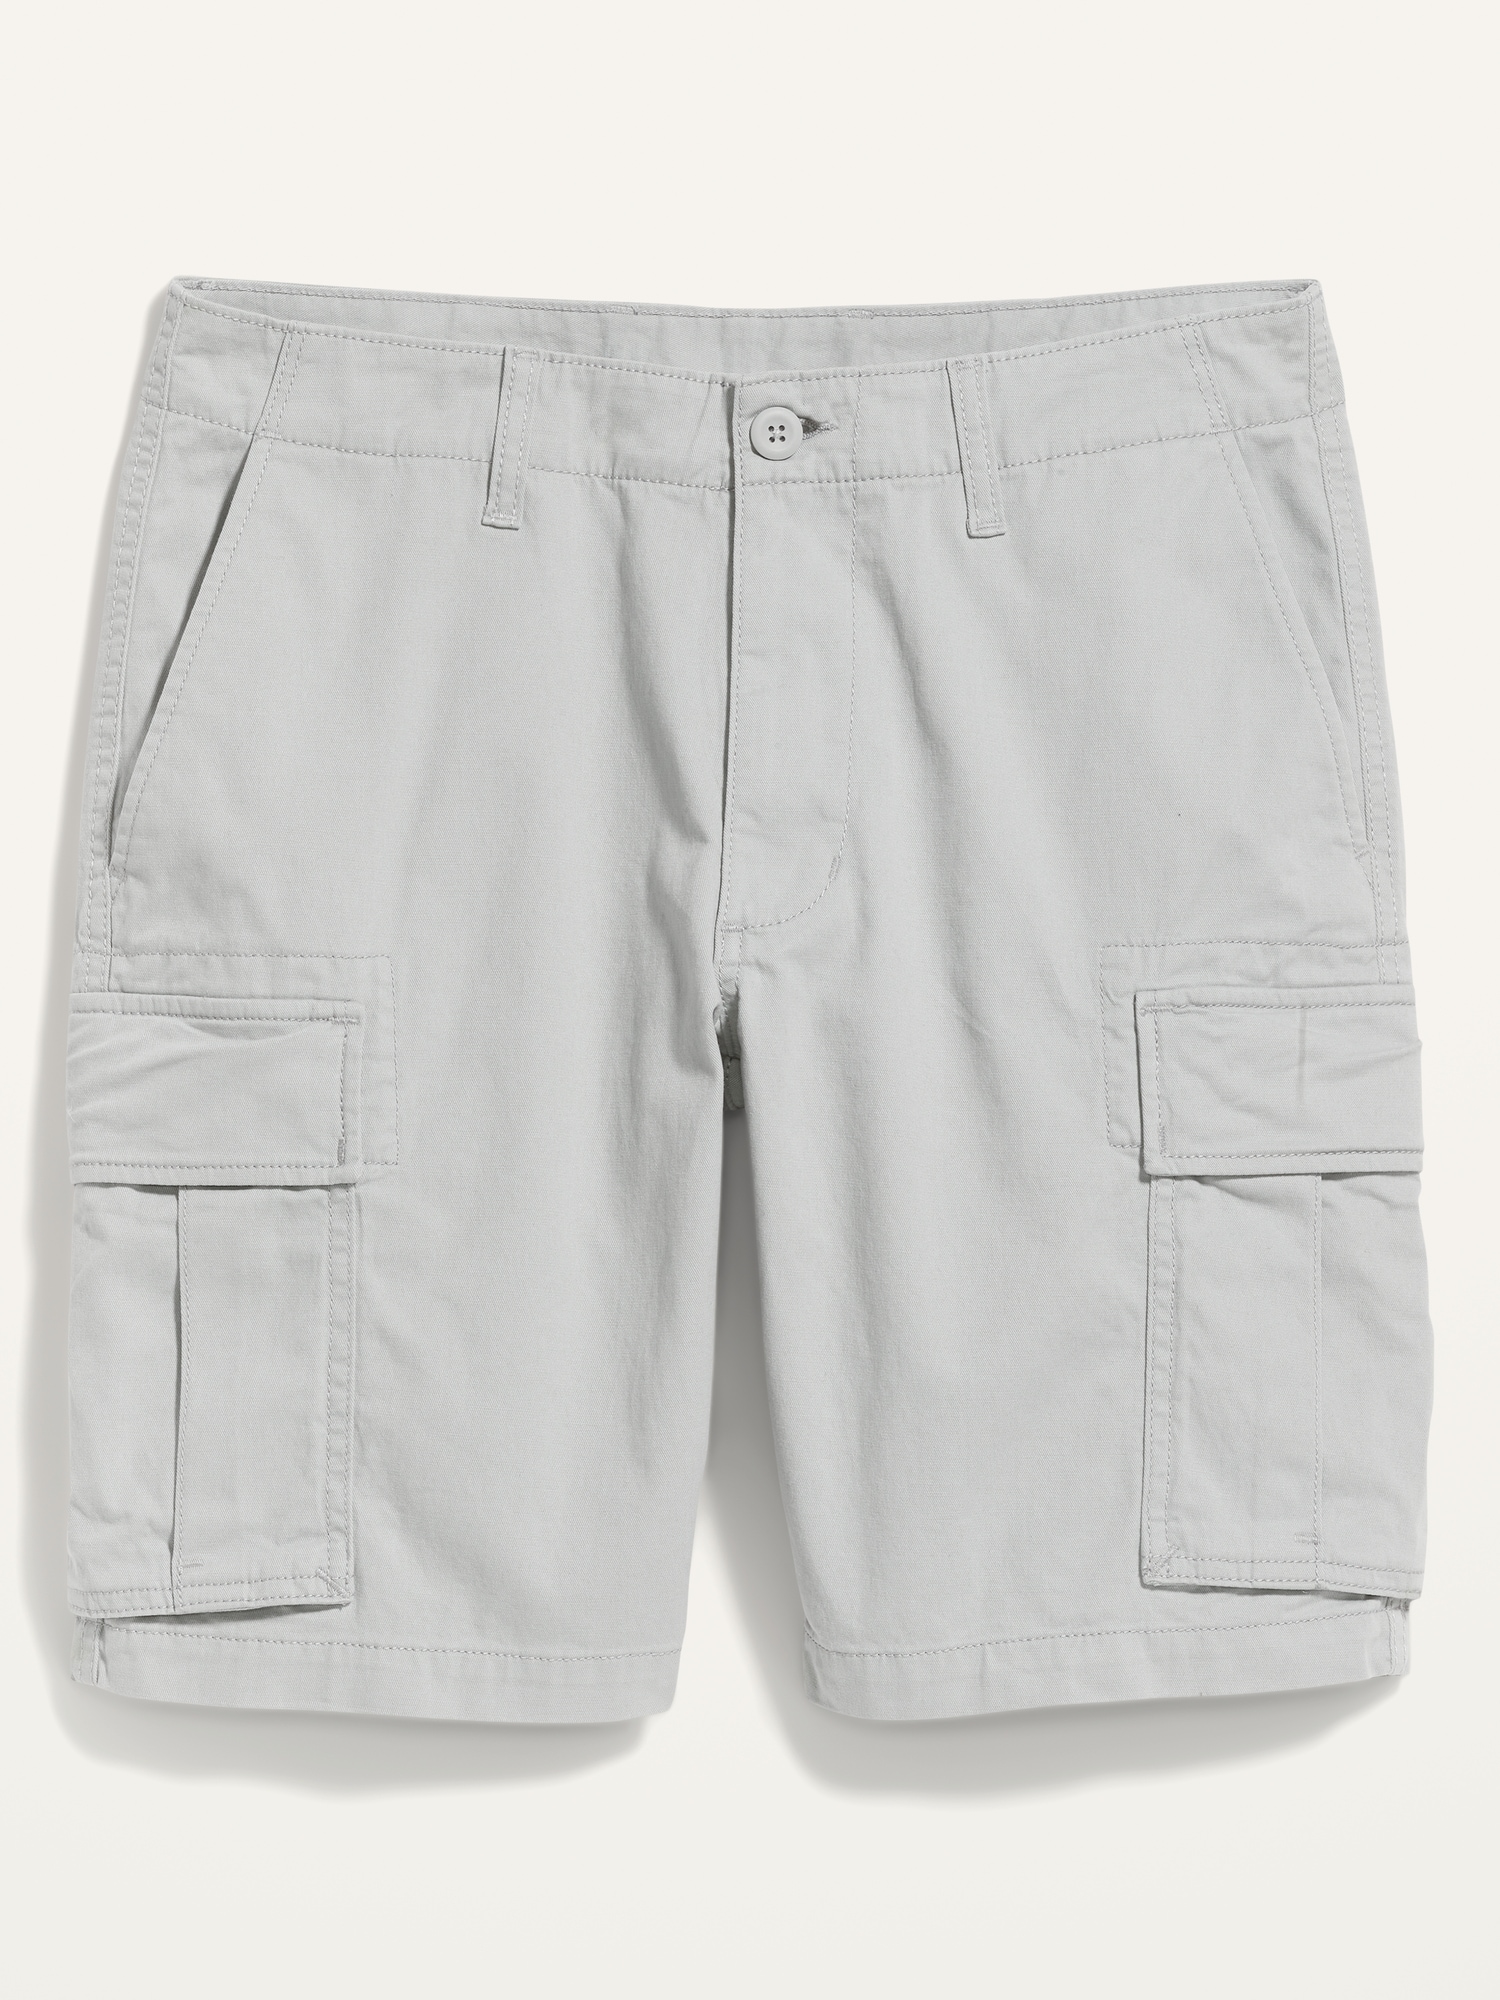 Shorts tipo Cargo Relaxed Lived-In Old Navy para Hombre